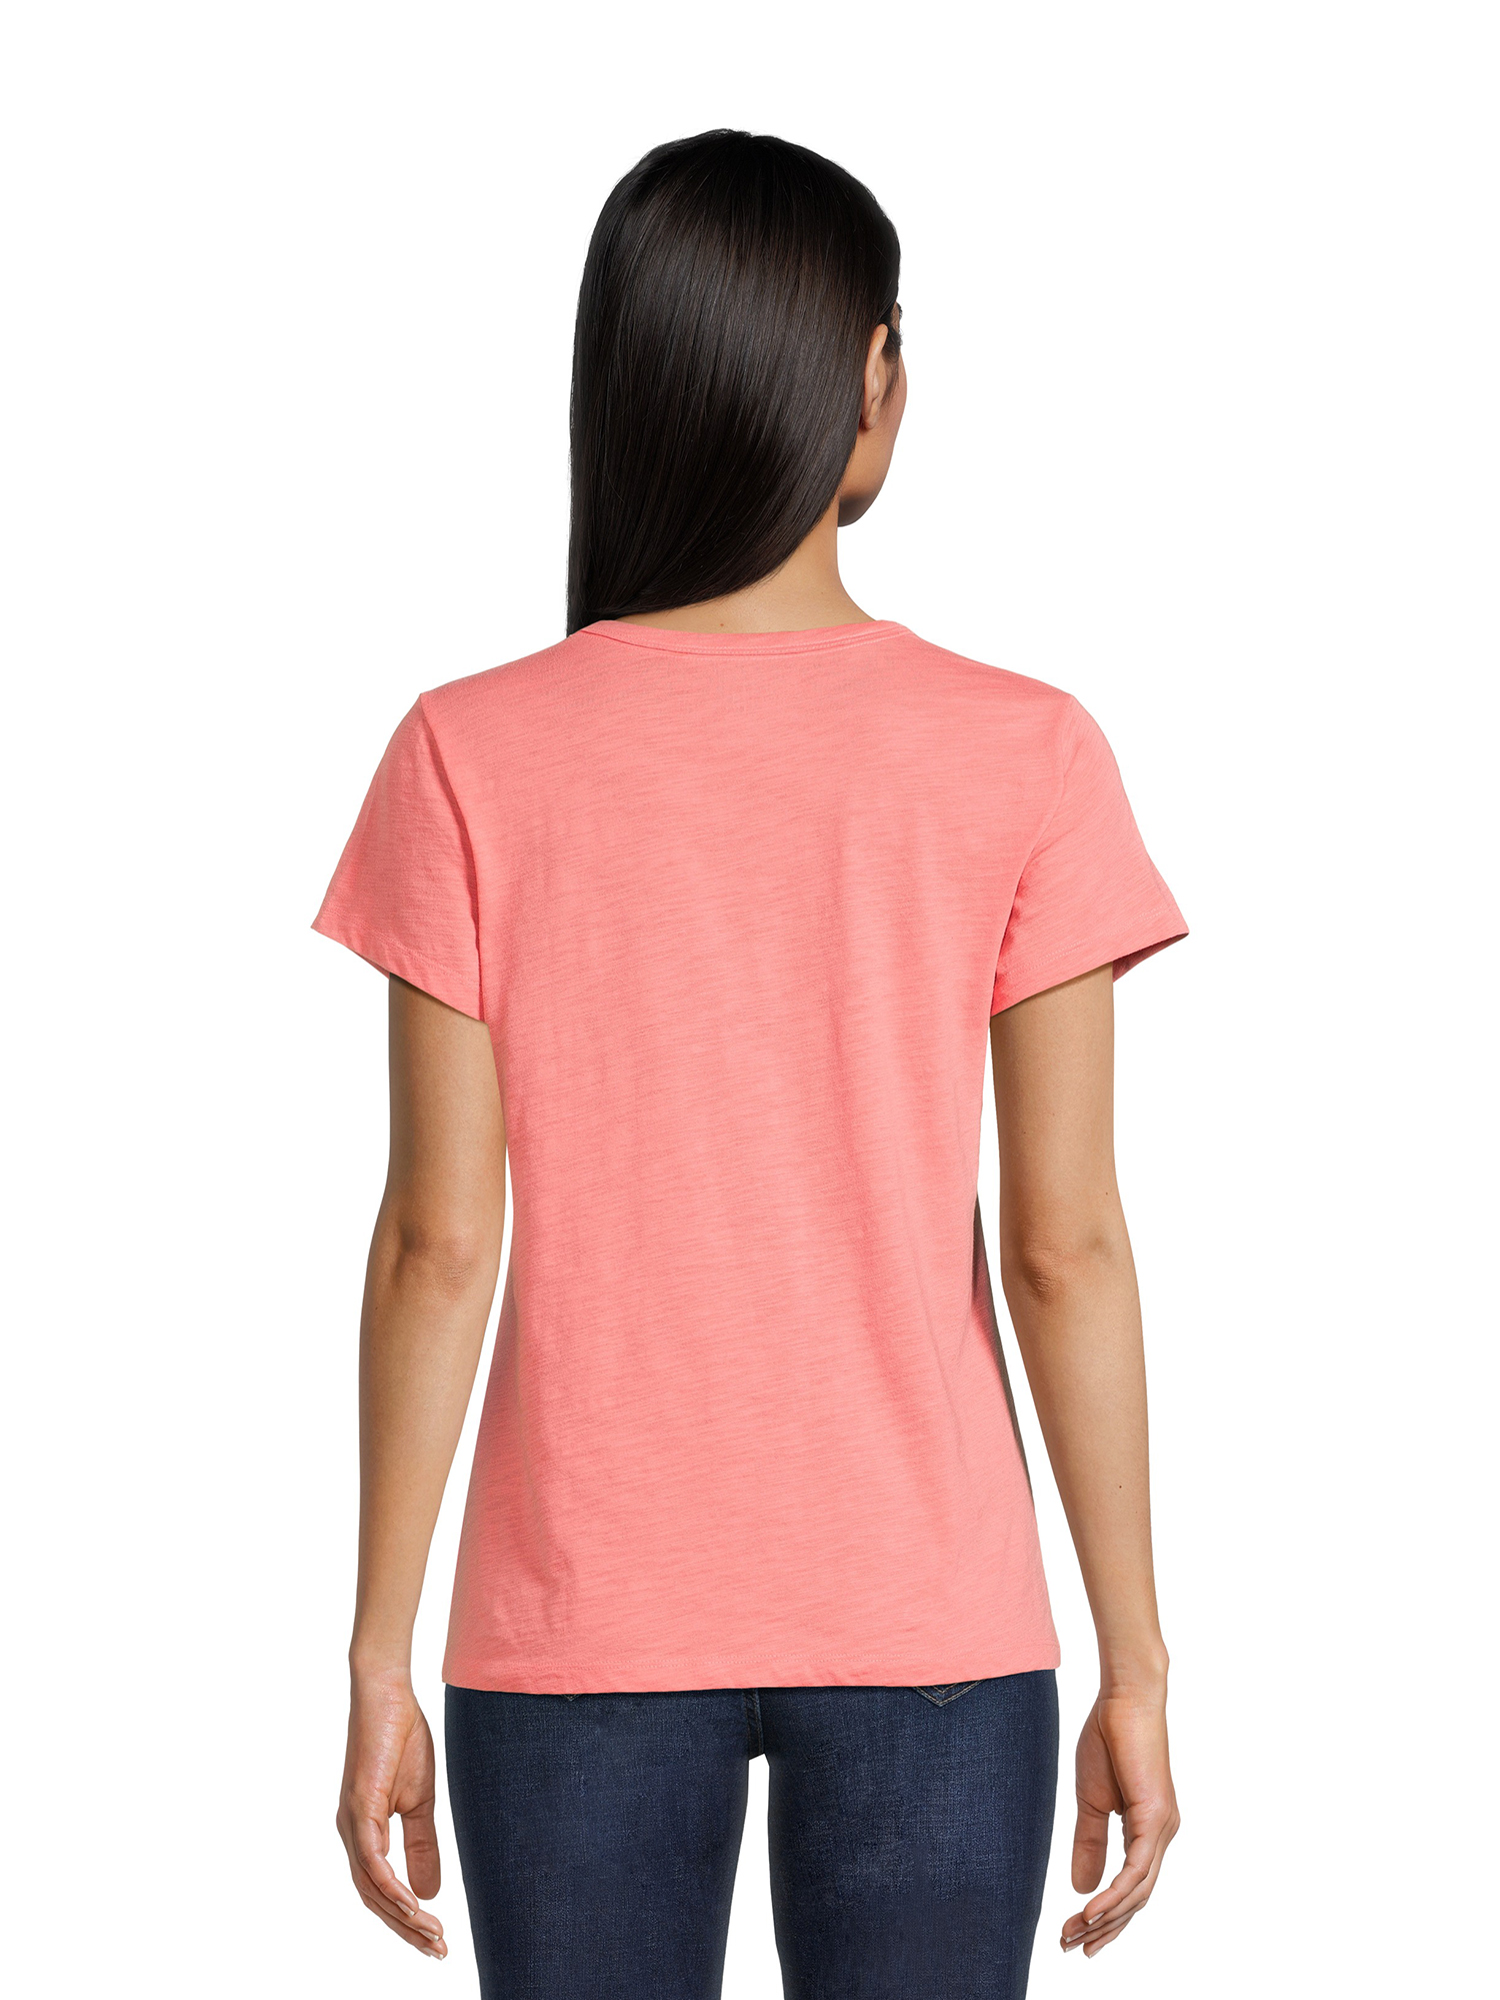 Time and Tru Women's Slub Texture Tee with Short Sleeves, Sizes S-XXXL - image 3 of 5